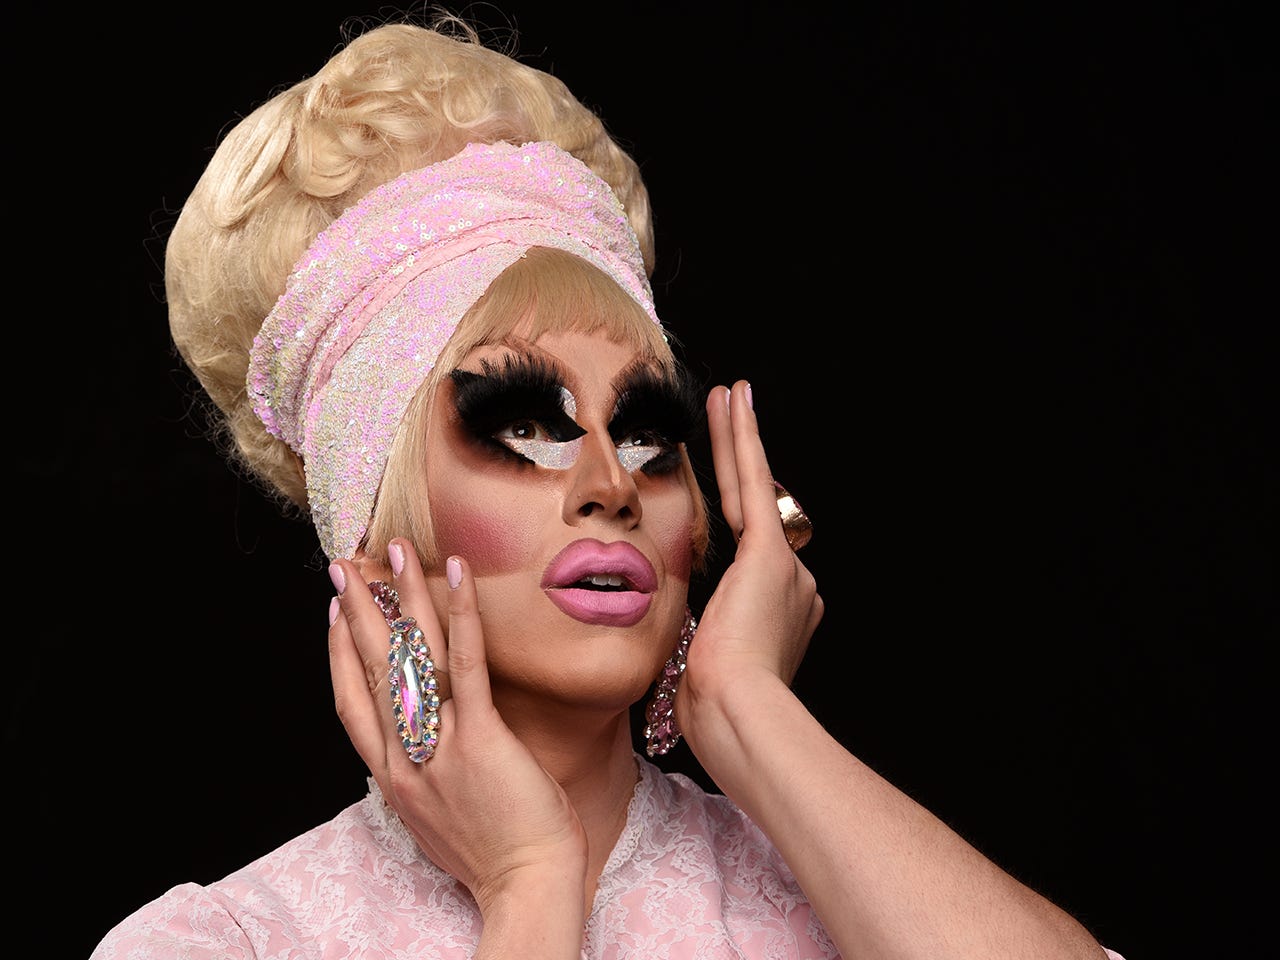 trixie mattel moving parts release date